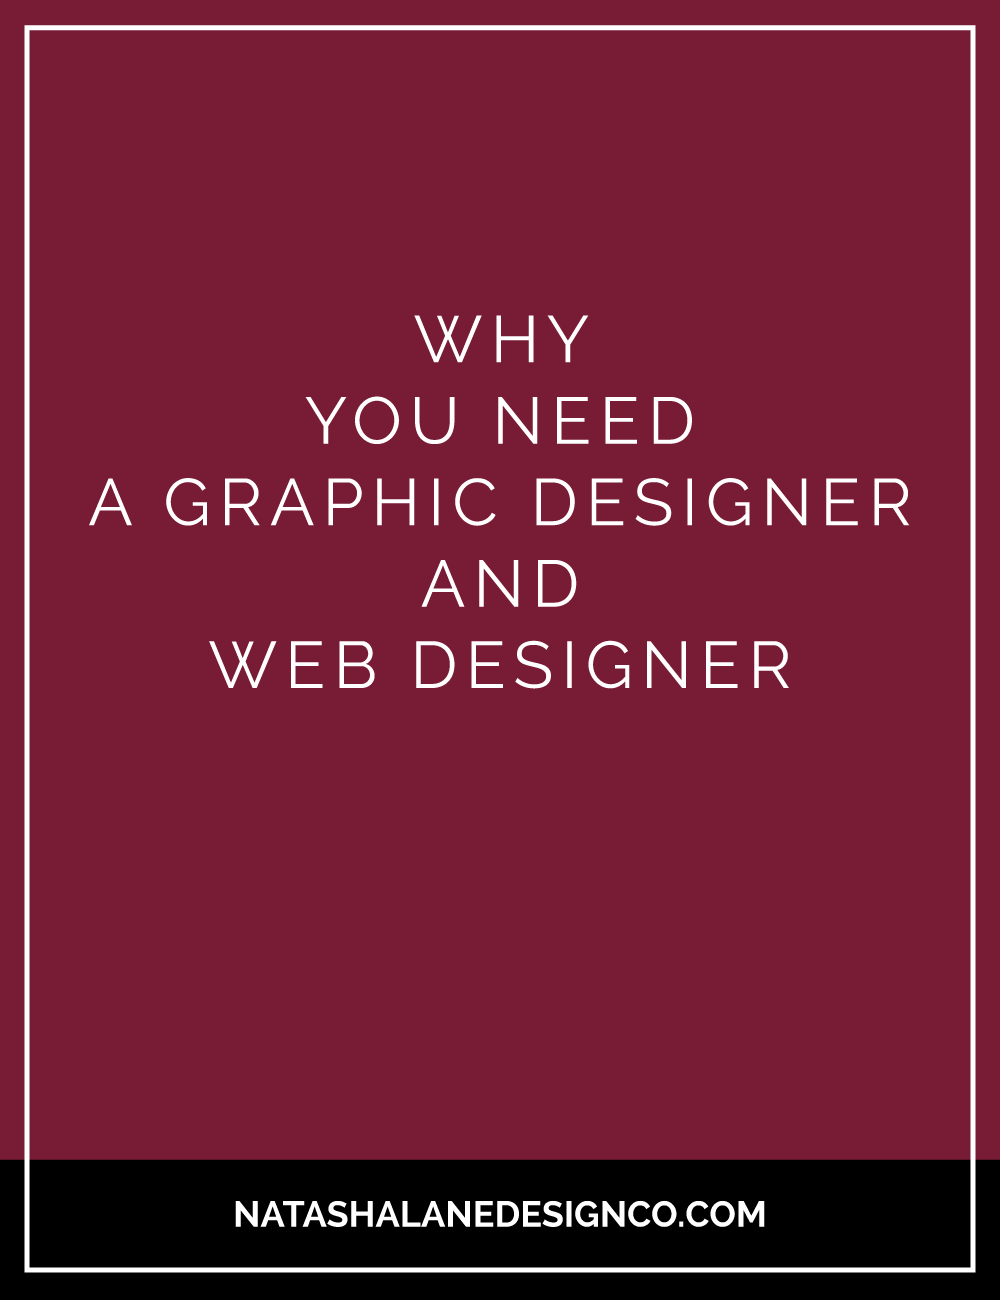 Blog Title- Why you need a graphic designer and web designer